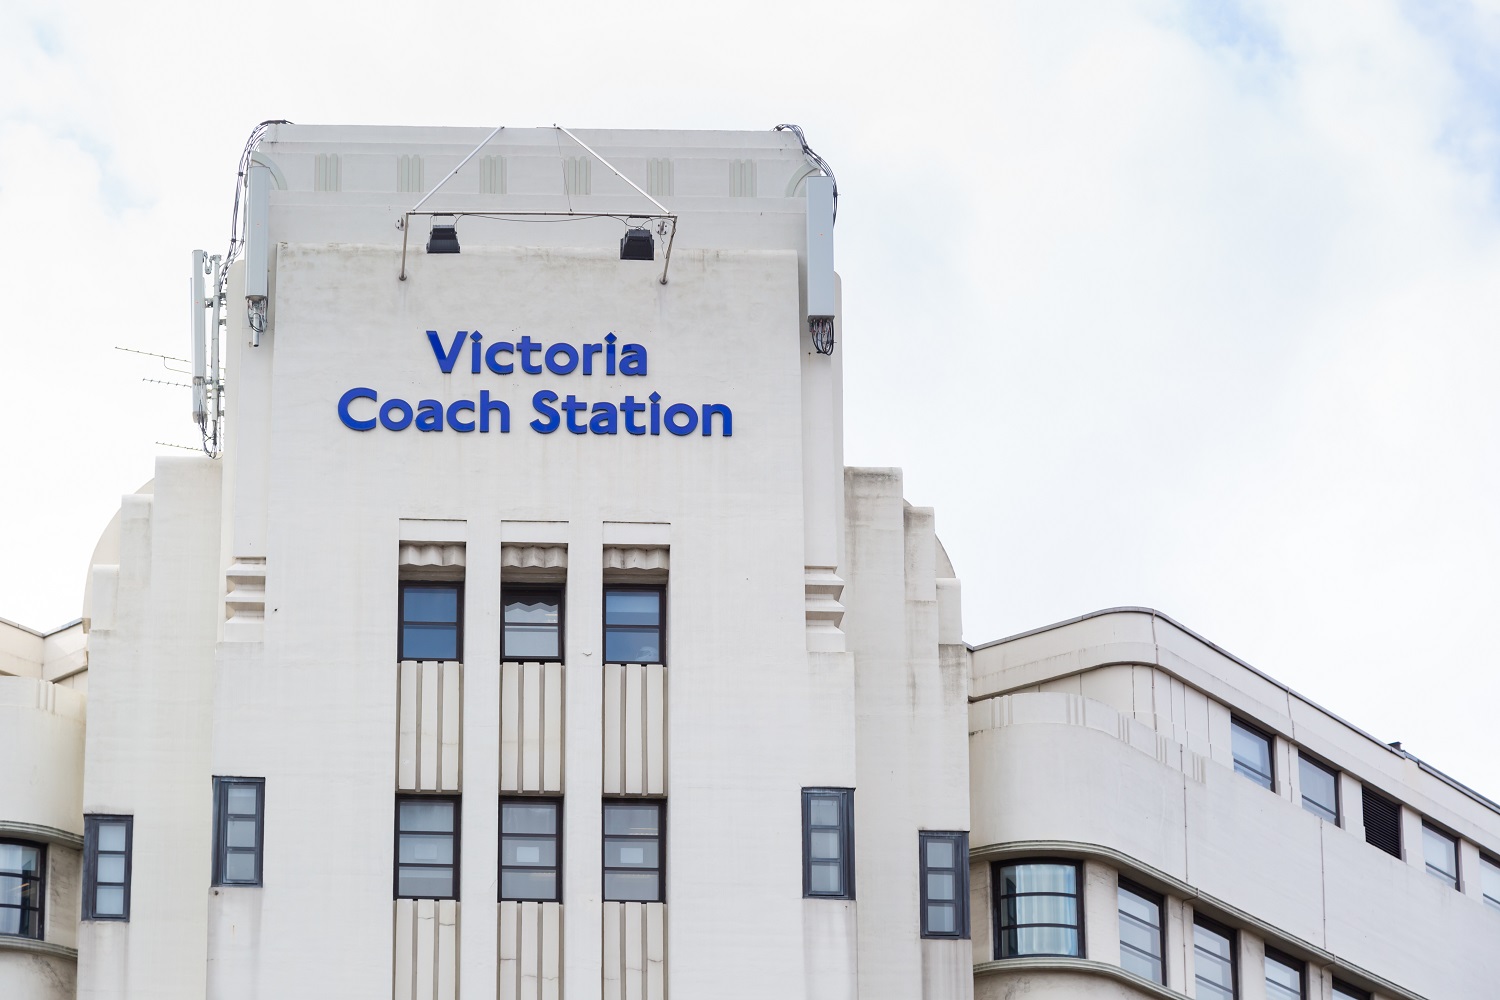 Victoria Coach Station marks 90 years